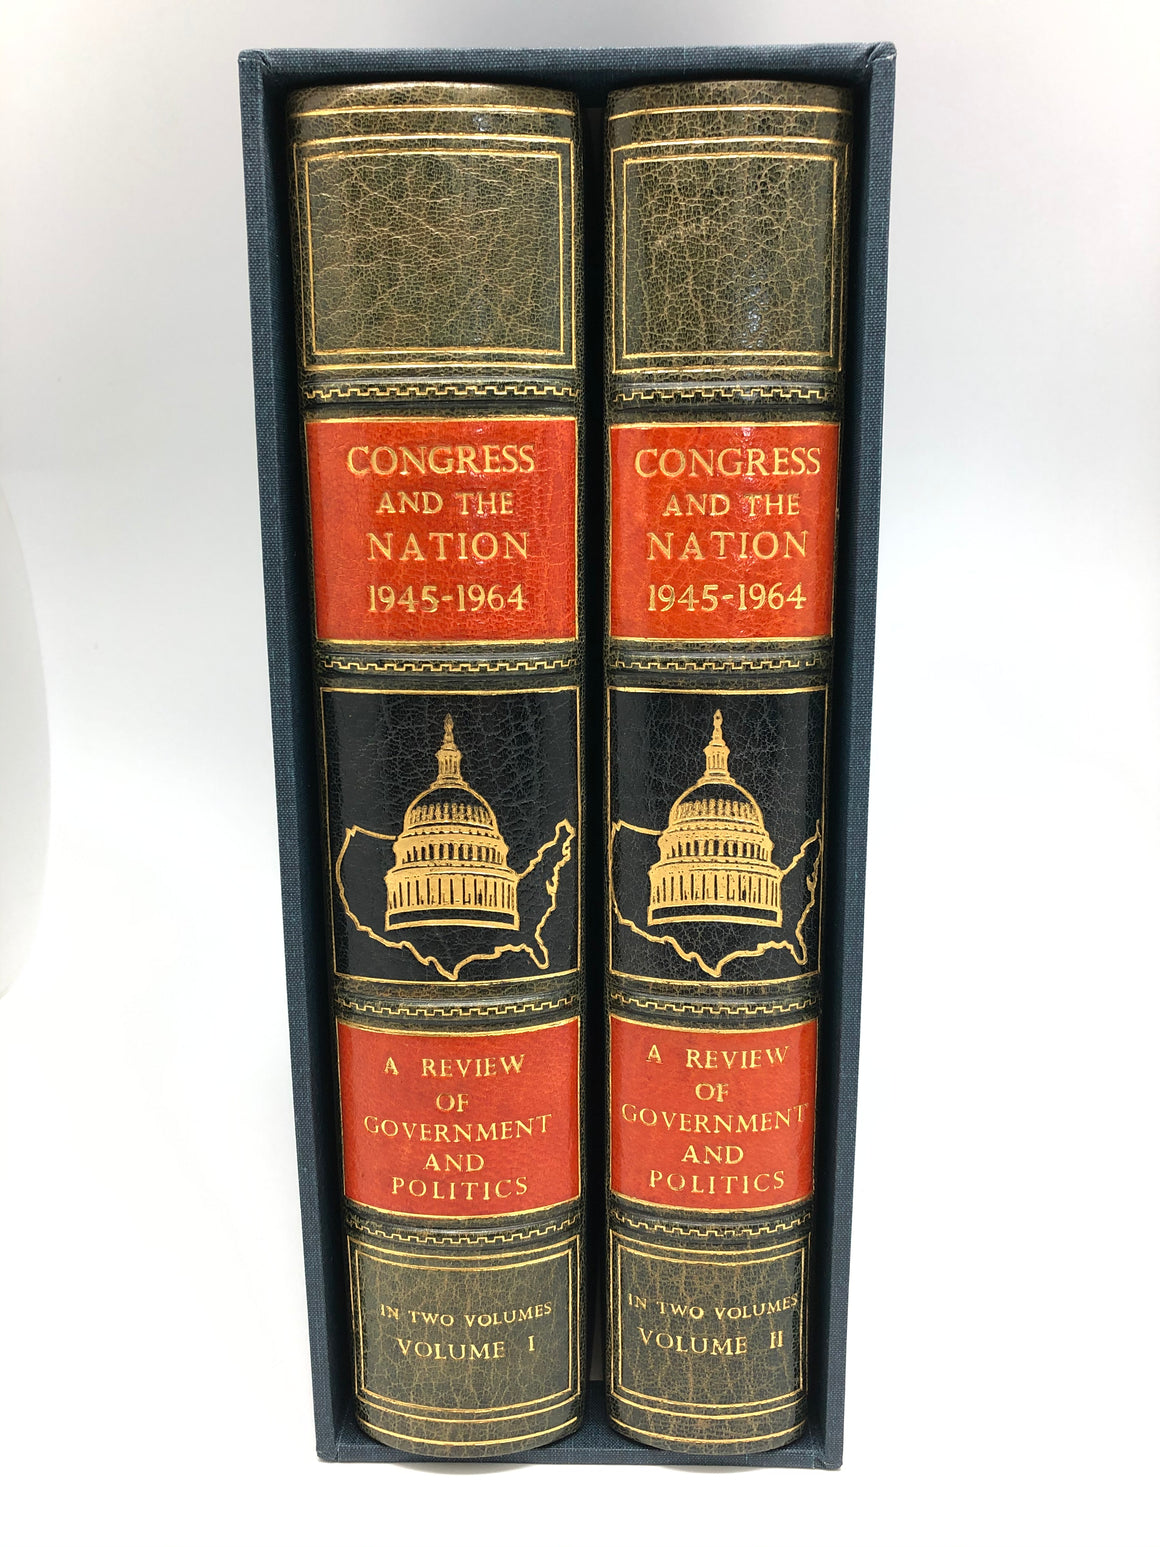 Congress and the Nation 1946-1964: A Review of Government and Politics, Published by the Congressional Quarterly Service, Two Volume Set